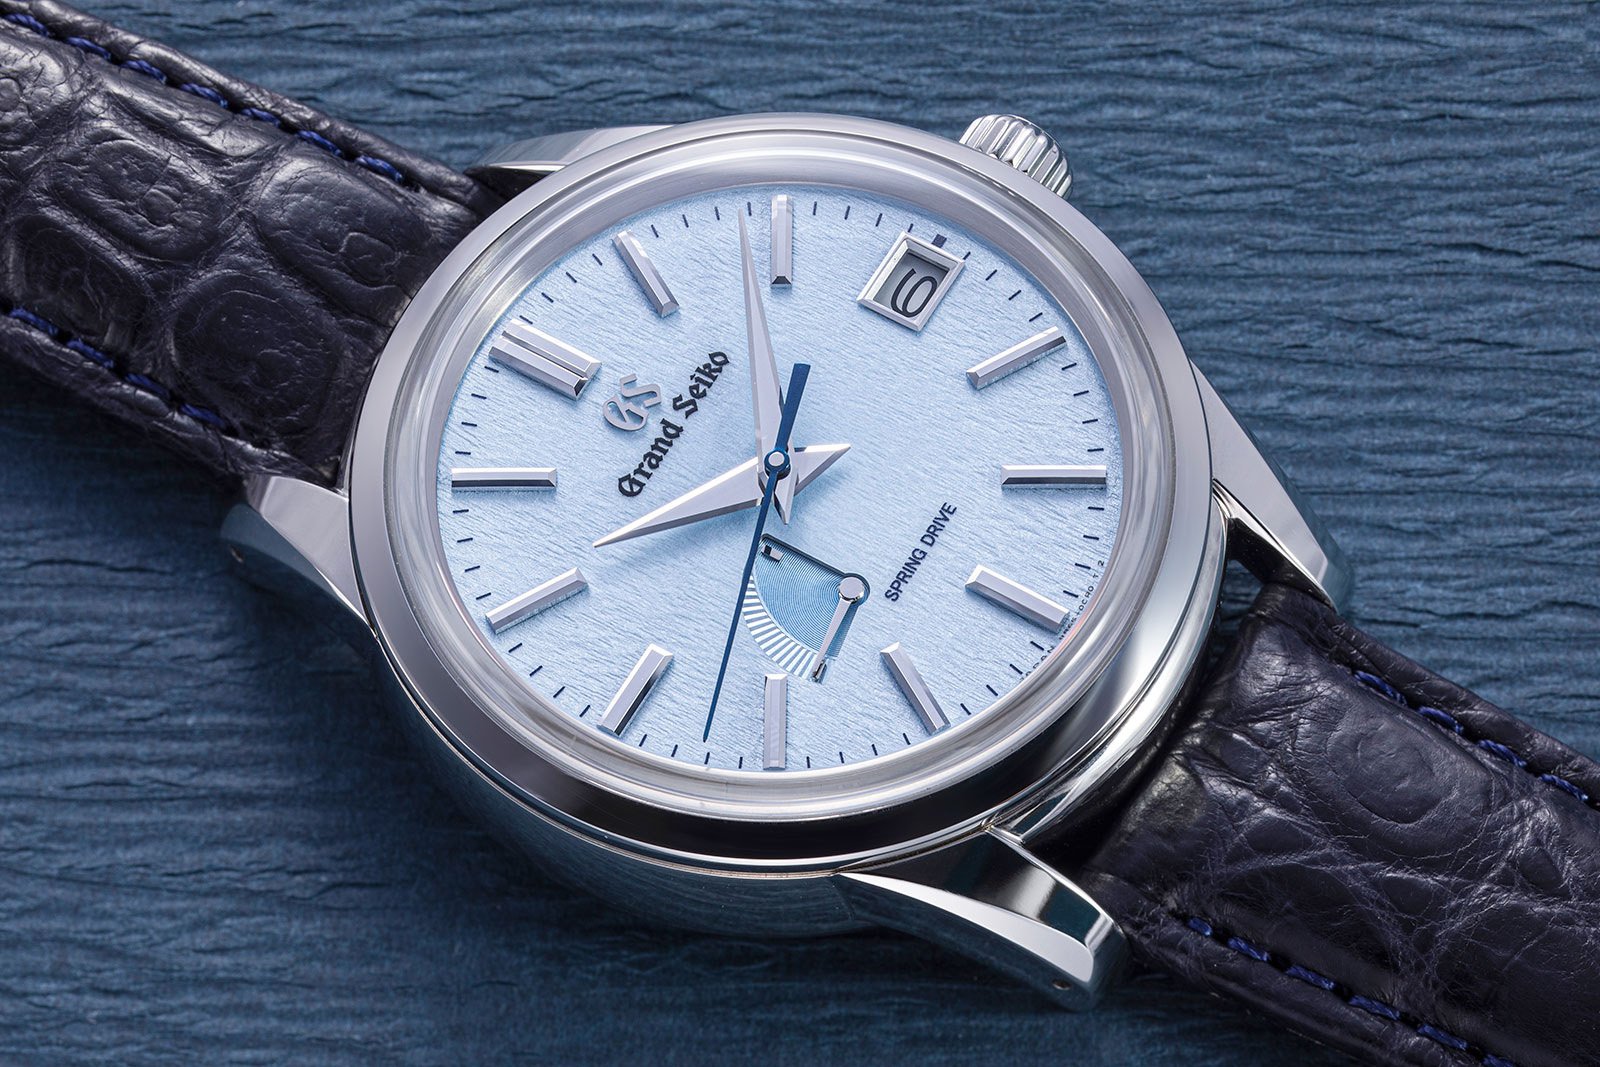 The watch technology of Spring Drive 9R movement by Grand Seiko– Strapcode